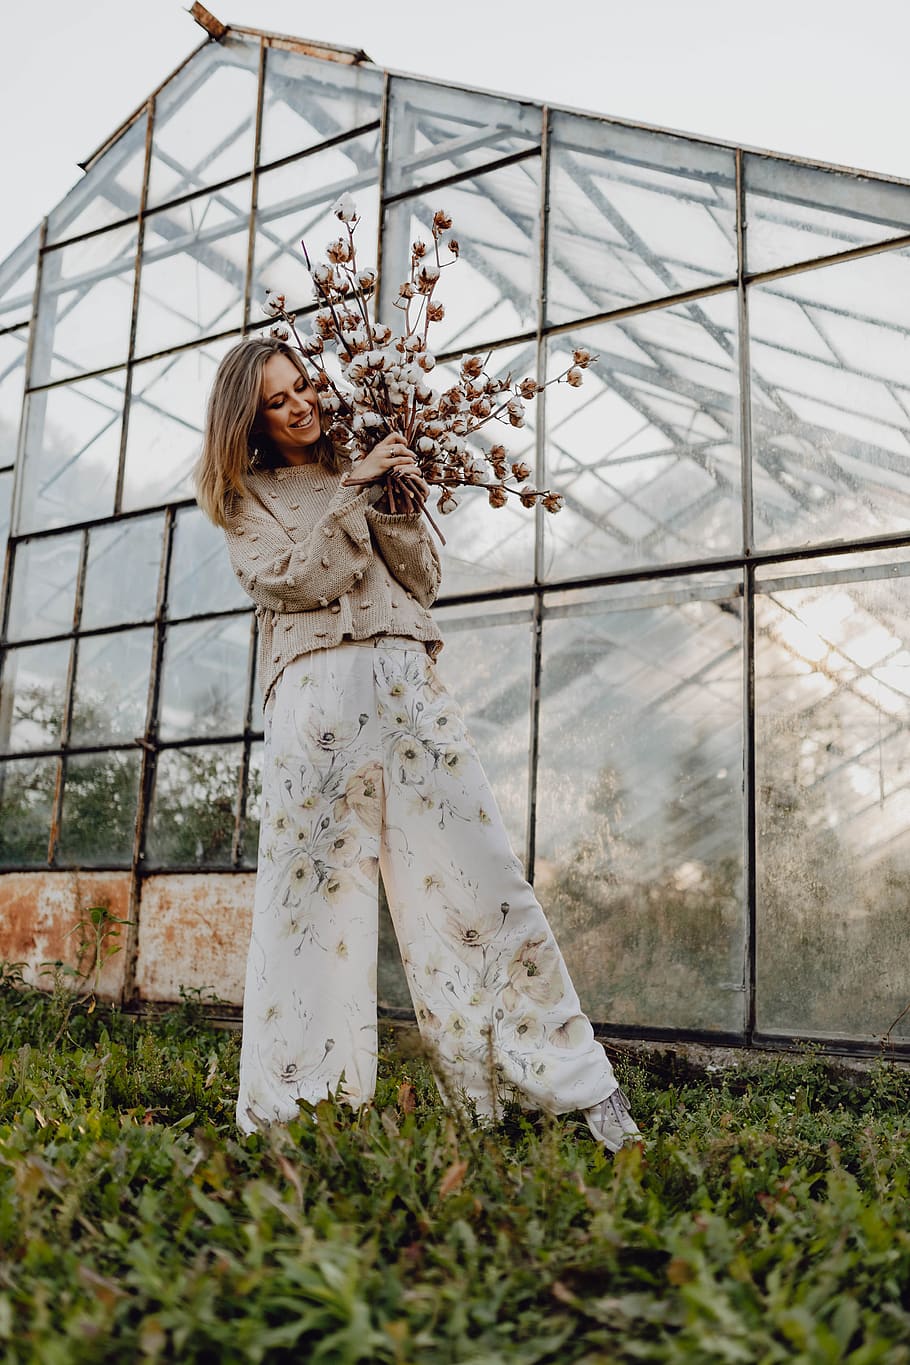 cotton, branches, woman, outdoor, nature, glasshouse, natural, farm, beautiful, tall